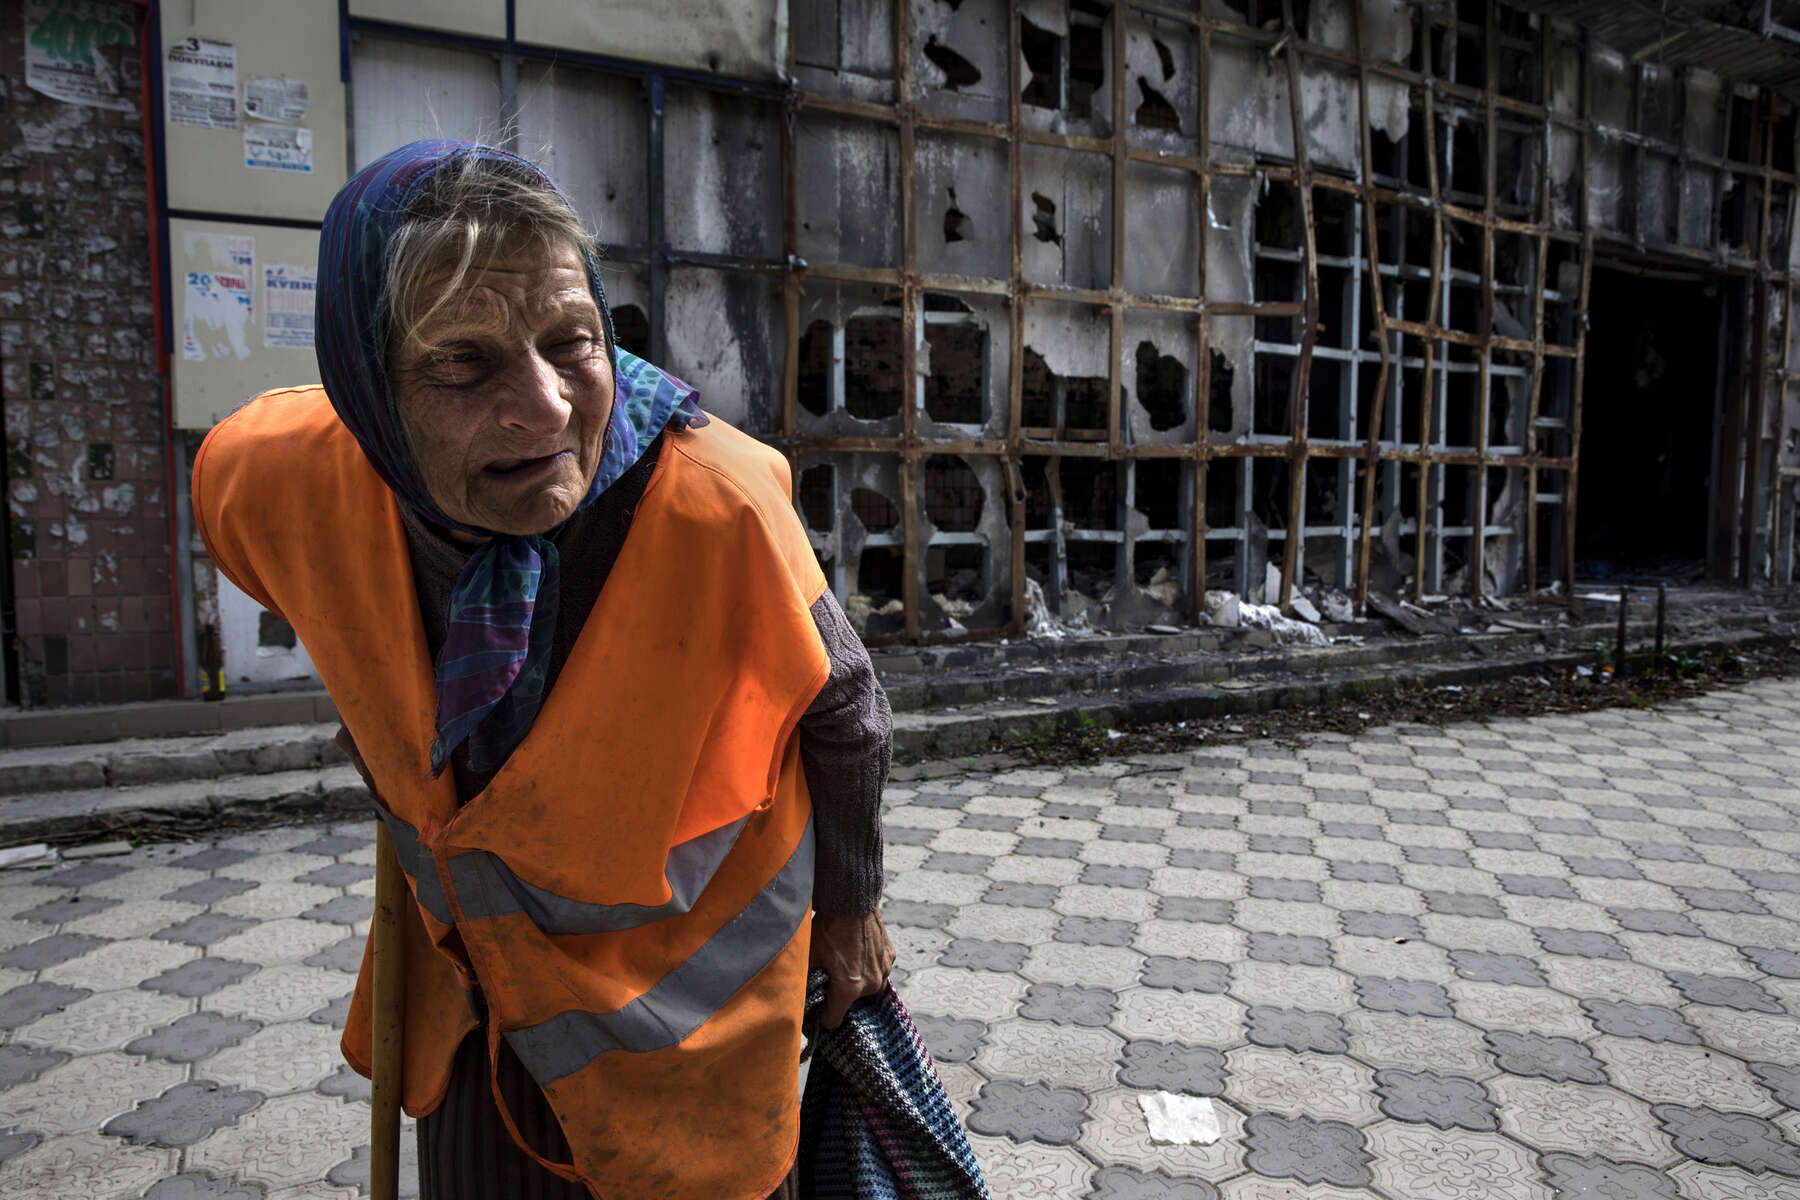 Donetsk People's Republic:Raisa Andreyevna, 72, walks by a local market area which was destroyed back in 2015. Since the start of the war she can no longer receive her Ukrainian pension of $50 a month so works as a janitor which pays her enough to survive. Originally from Russia, she now lives alone. Her children and grandchildren have all moved away to safer areas as part of Donetsk remain dangerous and occasionally gets shelled. {quote}I am not afraid to get killed because I have already lived my life but they have children they have to take care of. 